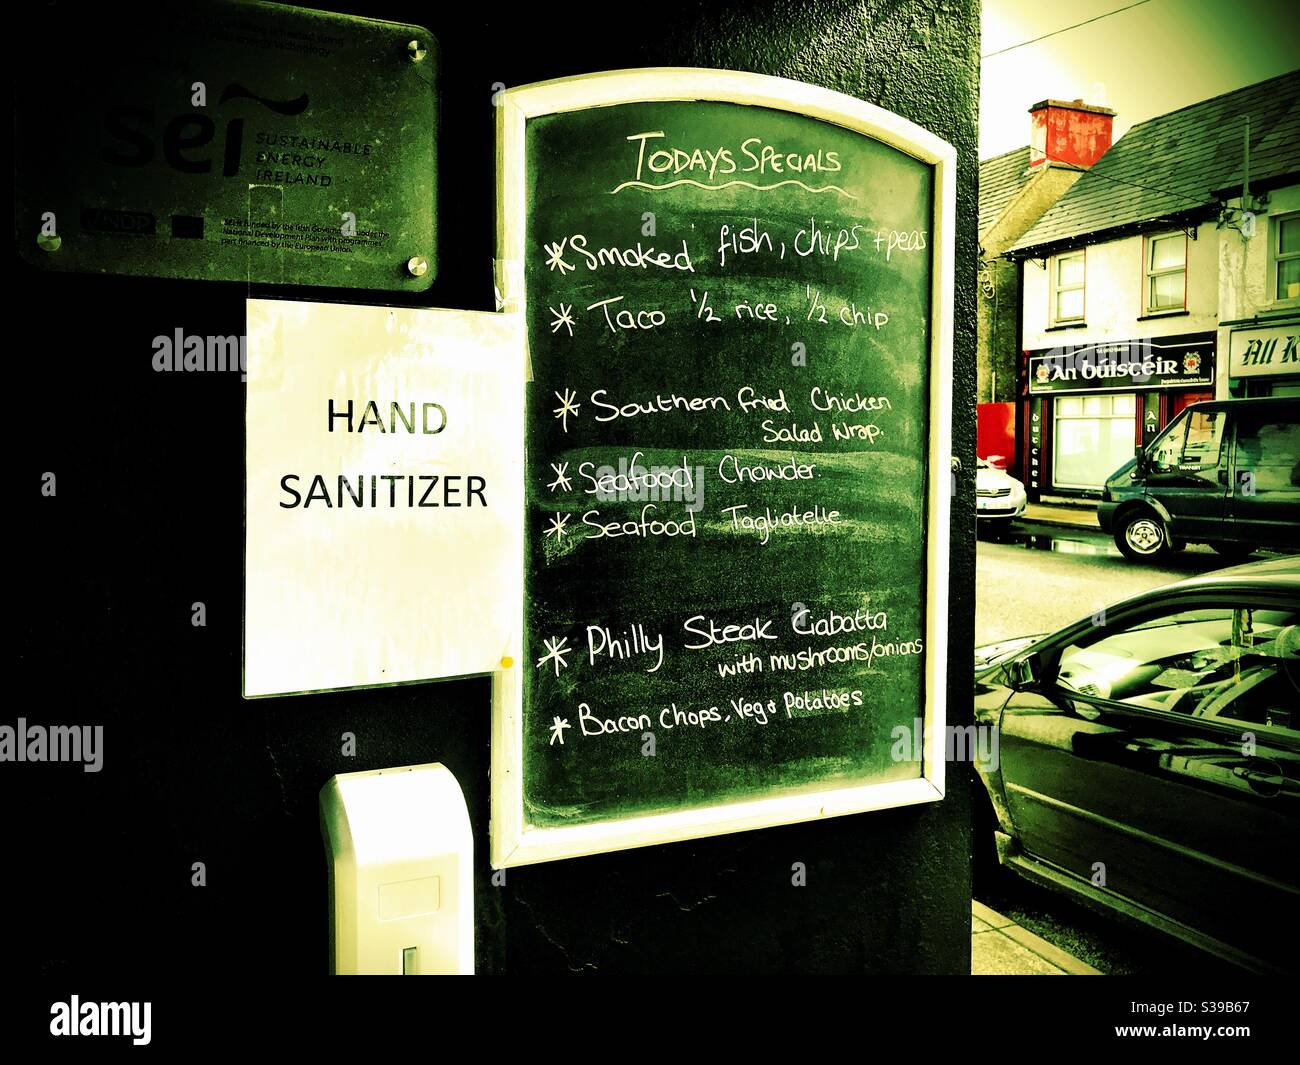 Cafe menu shows daily specials with hand sanitizer dispenser during Covid19 pandemic. County Donegal, Ireland Stock Photo